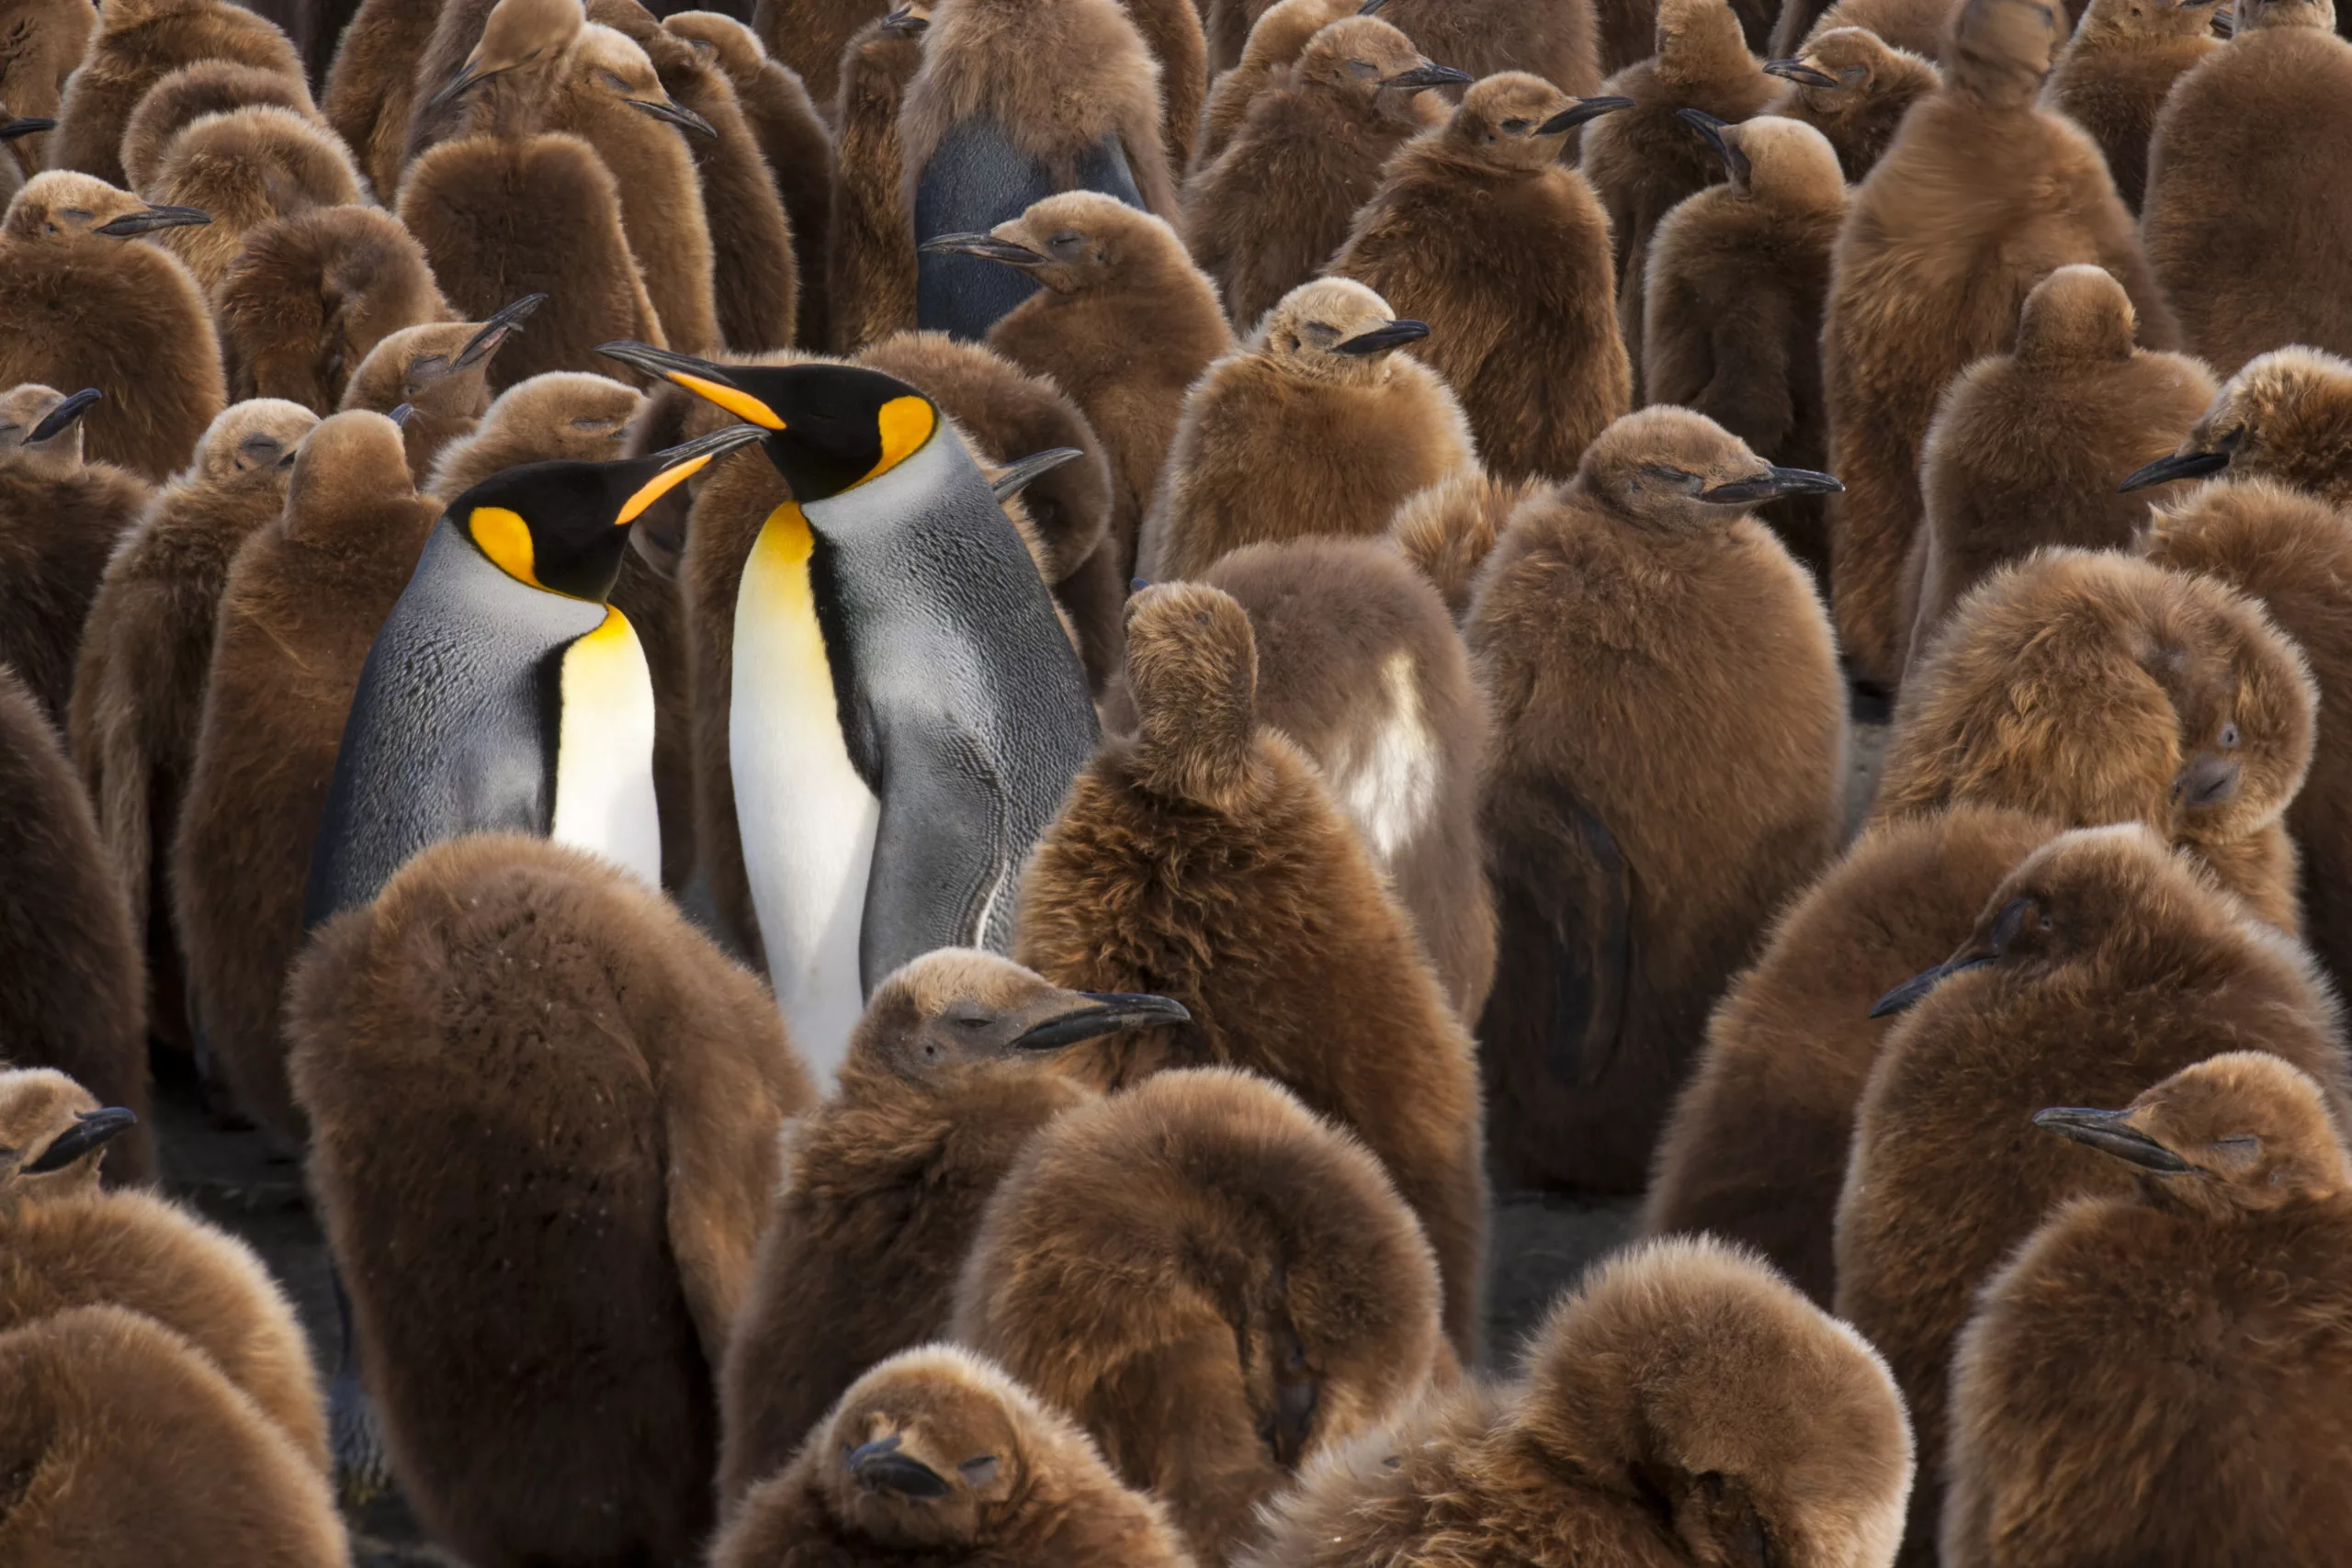 A colony of King Penguins, Aptenodytes patagonicus. Fledgling chicks with brown fluffy coats, standing in large groups, with some adults among them.